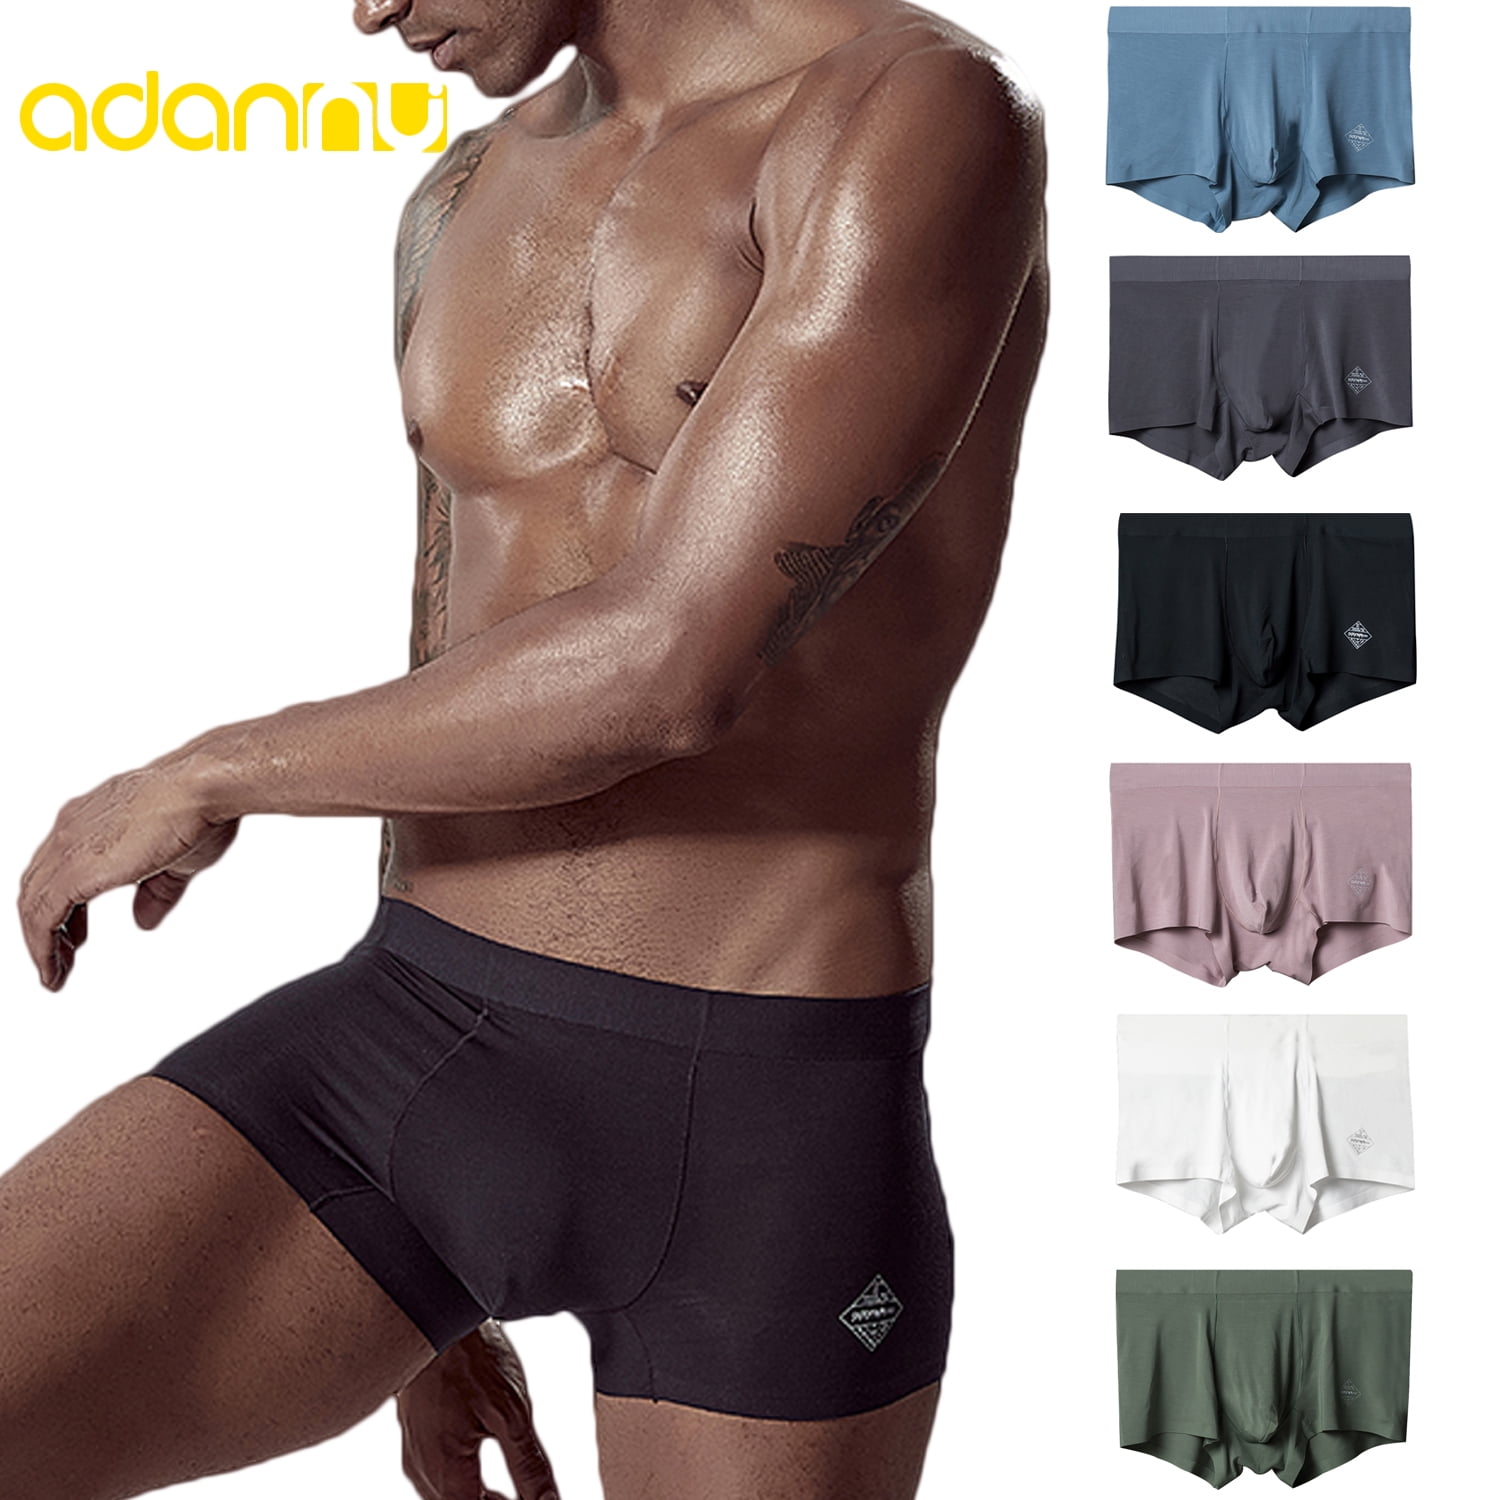 ADANNU Men's Underwear Support Pouch Boxer Briefs for All-Day Comfort 6  Pack Multicolor,Size M-2XL